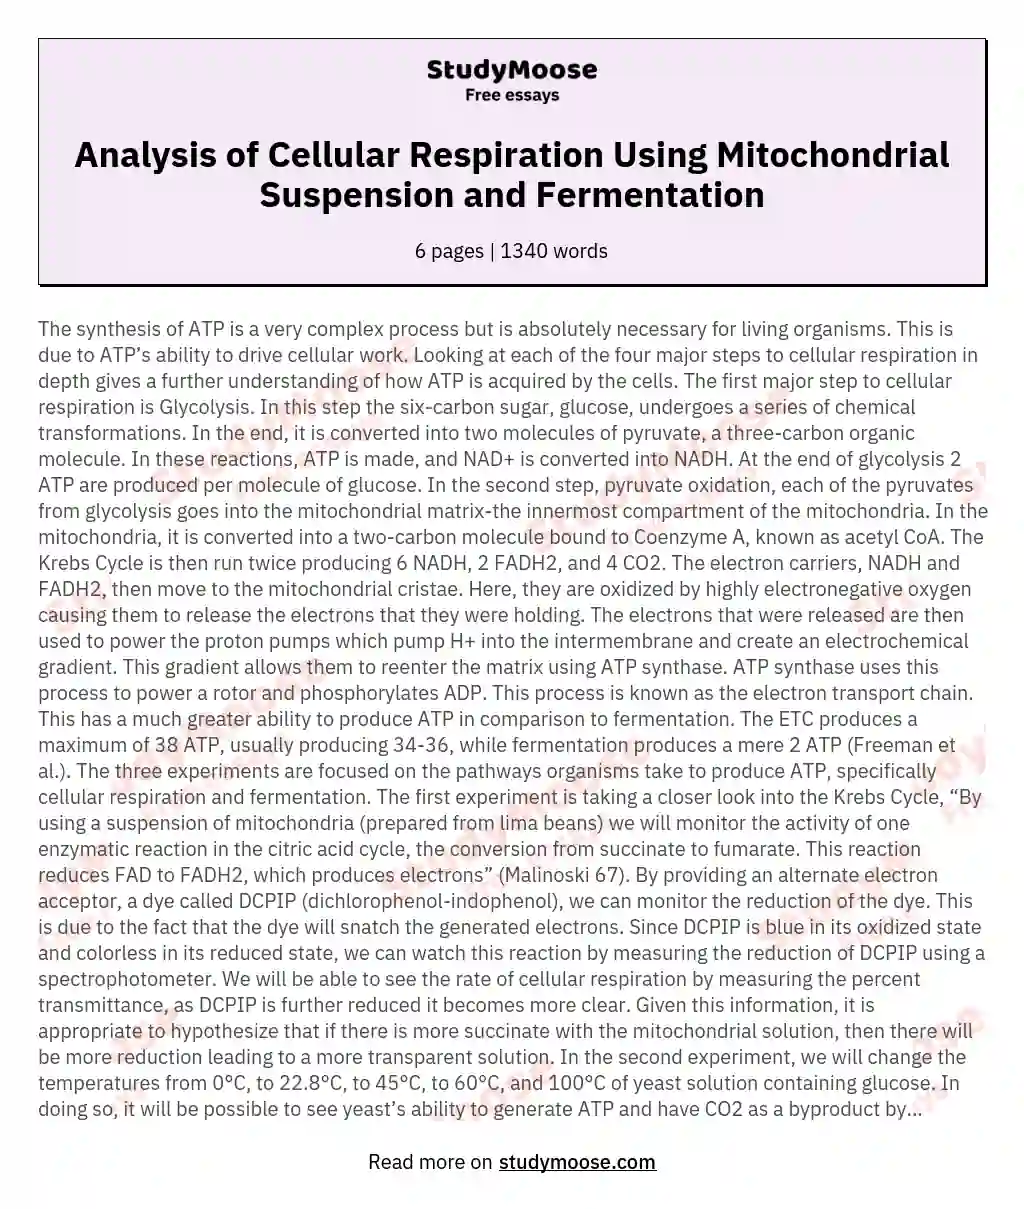 Analysis of Cellular Respiration Using Mitochondrial Suspension and Fermentation essay